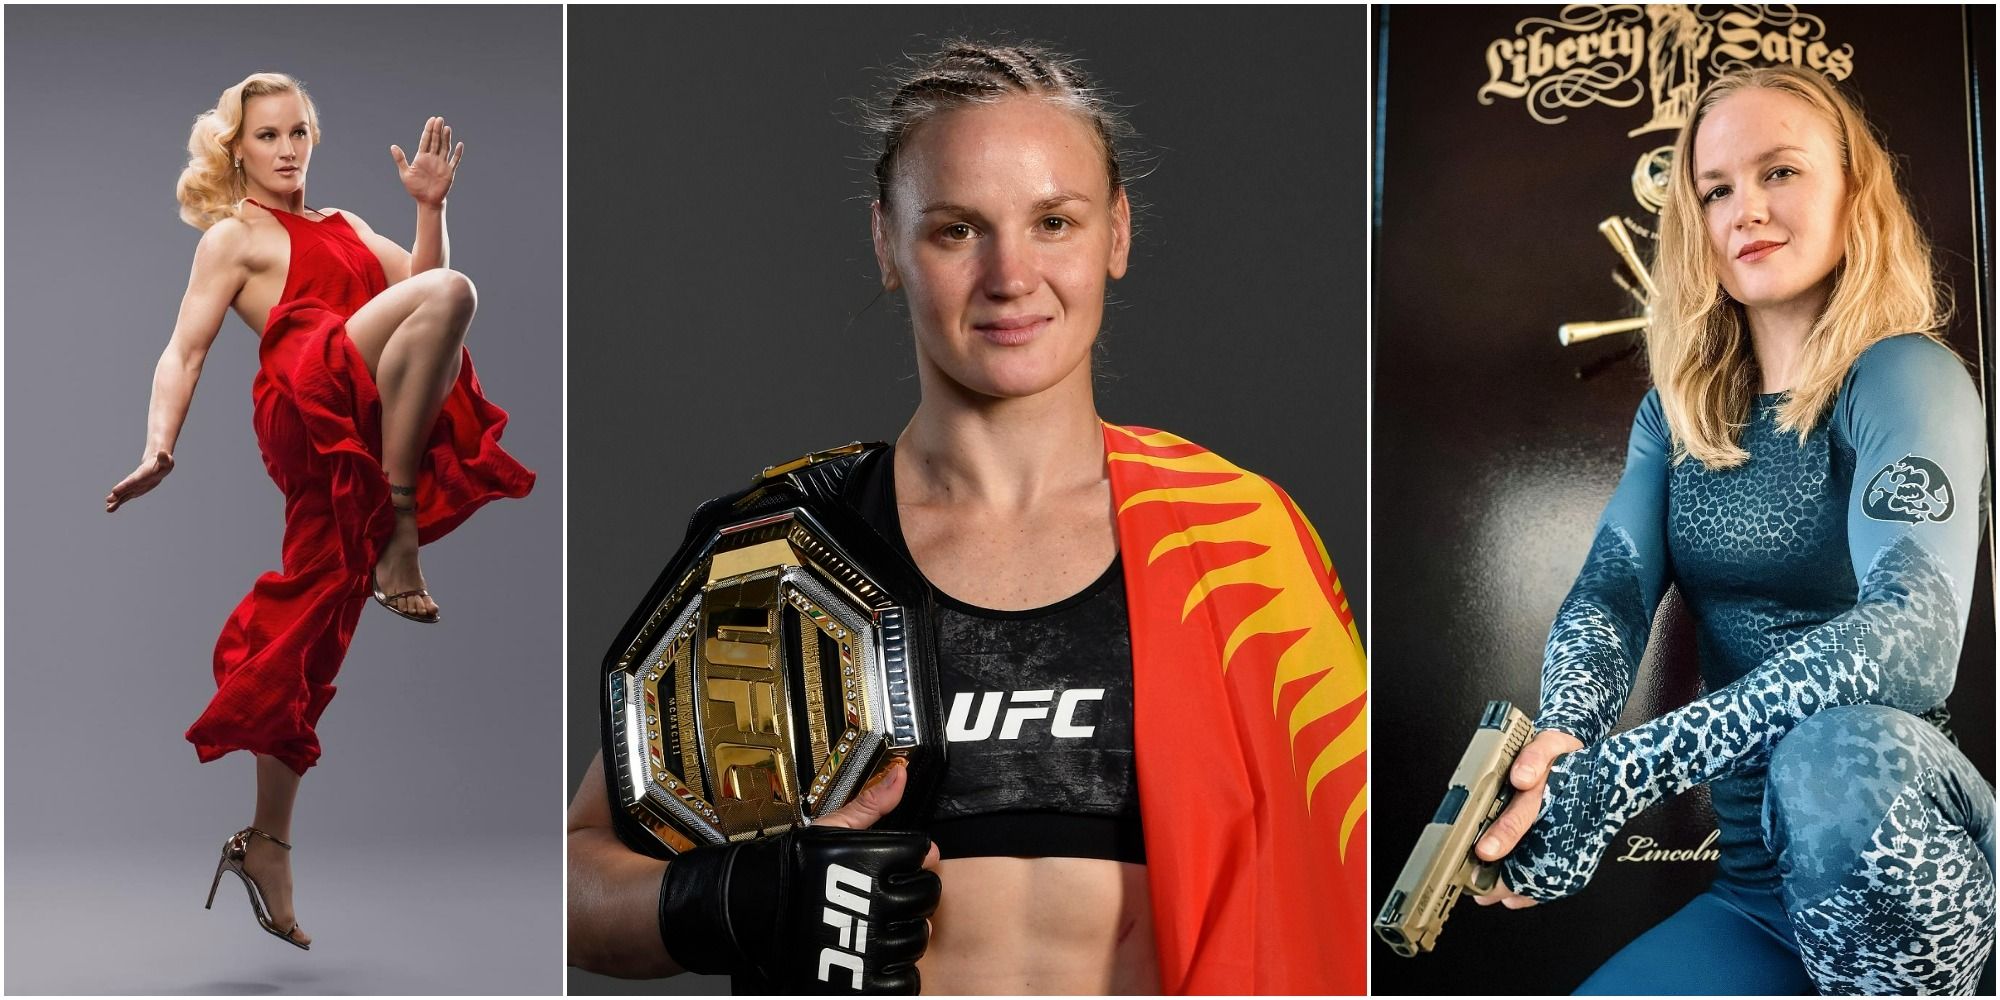 7 Things You Didn't Know About UFC Fighter Valentina Shevchenko